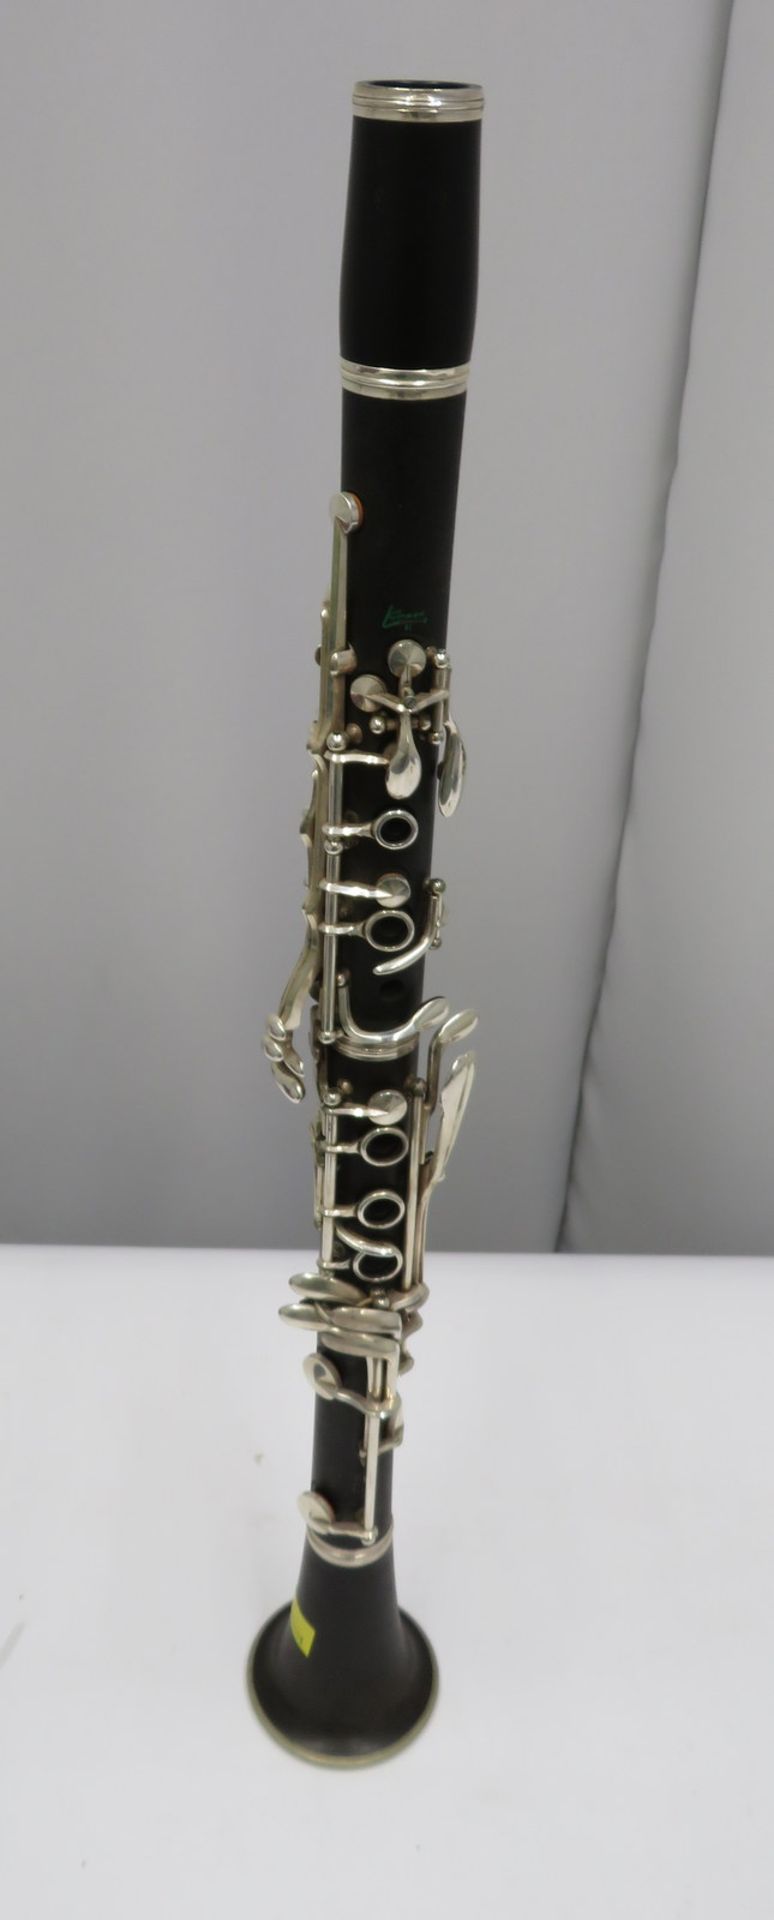 Buffet Crampon L Green clarinet with case. Serial number: 479049. - Image 3 of 18